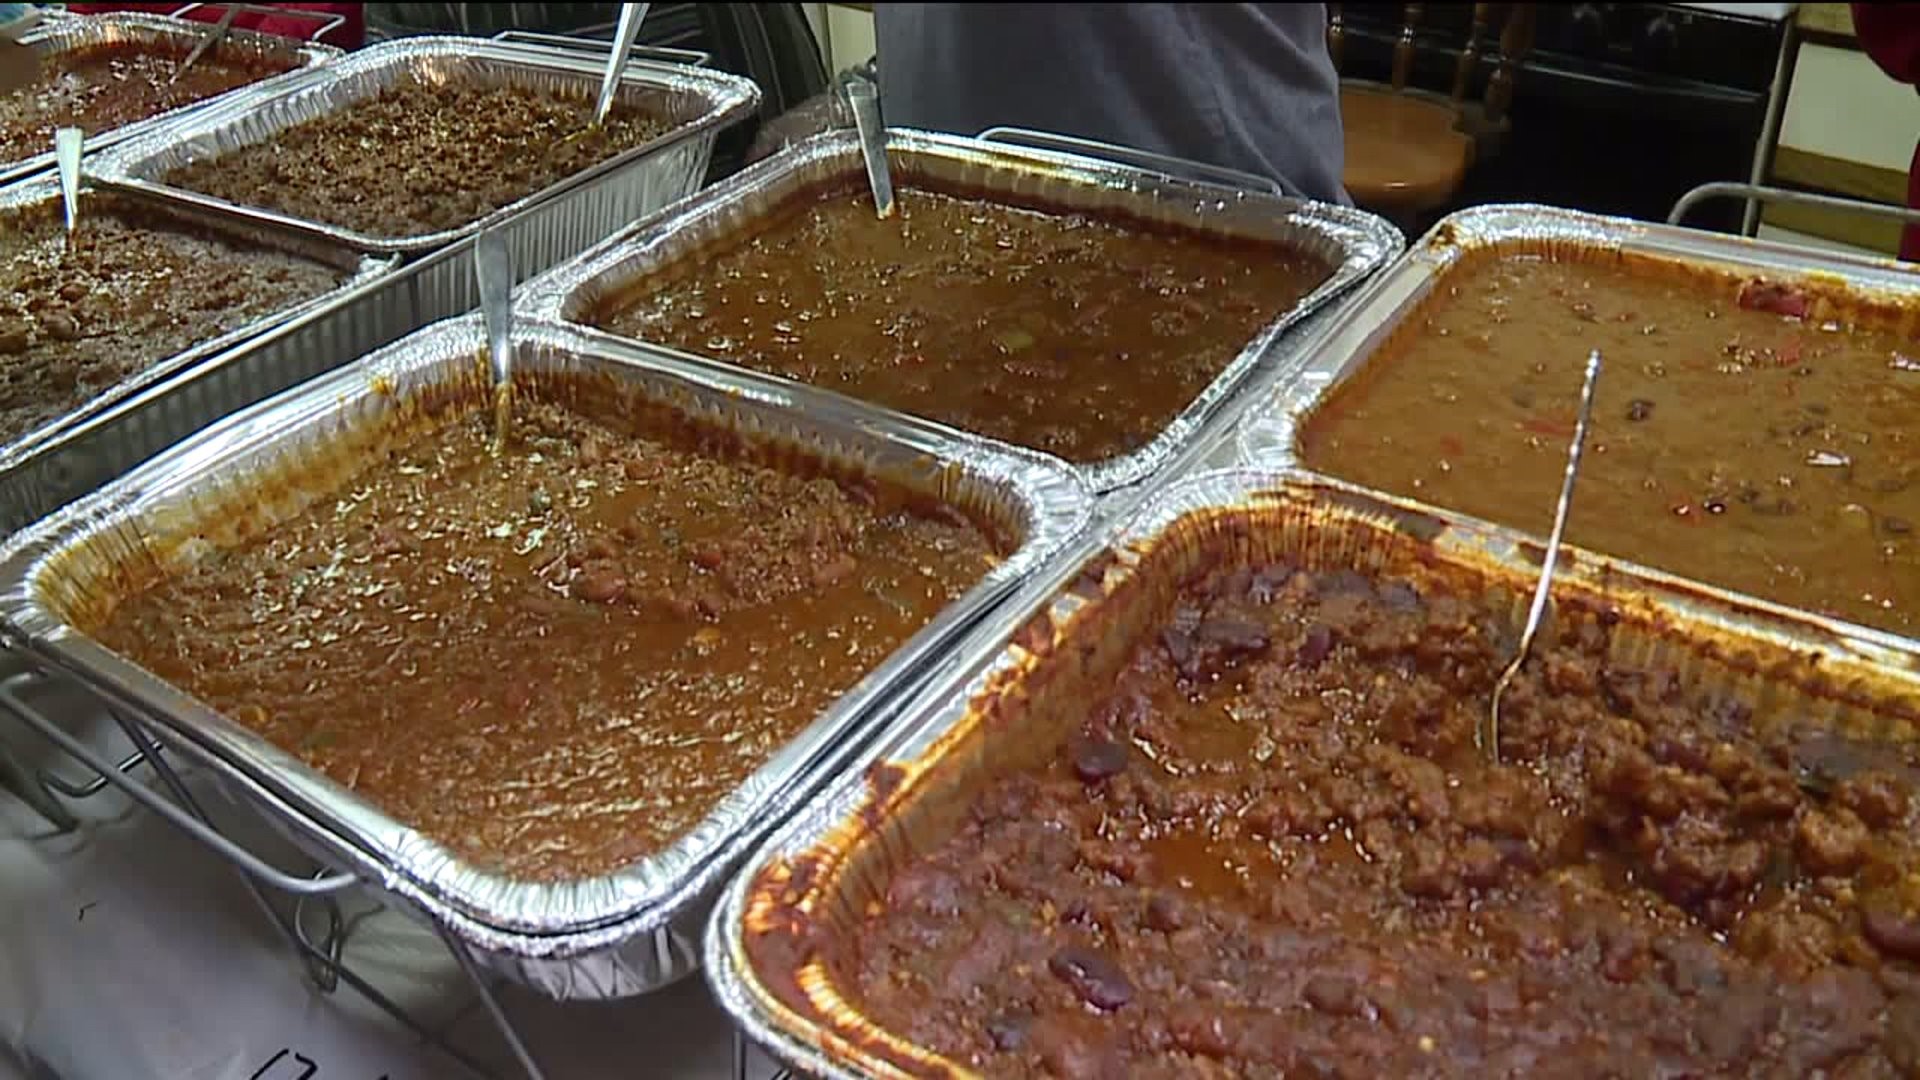 Chili Cook-off Benefits Dunmore Marching Band